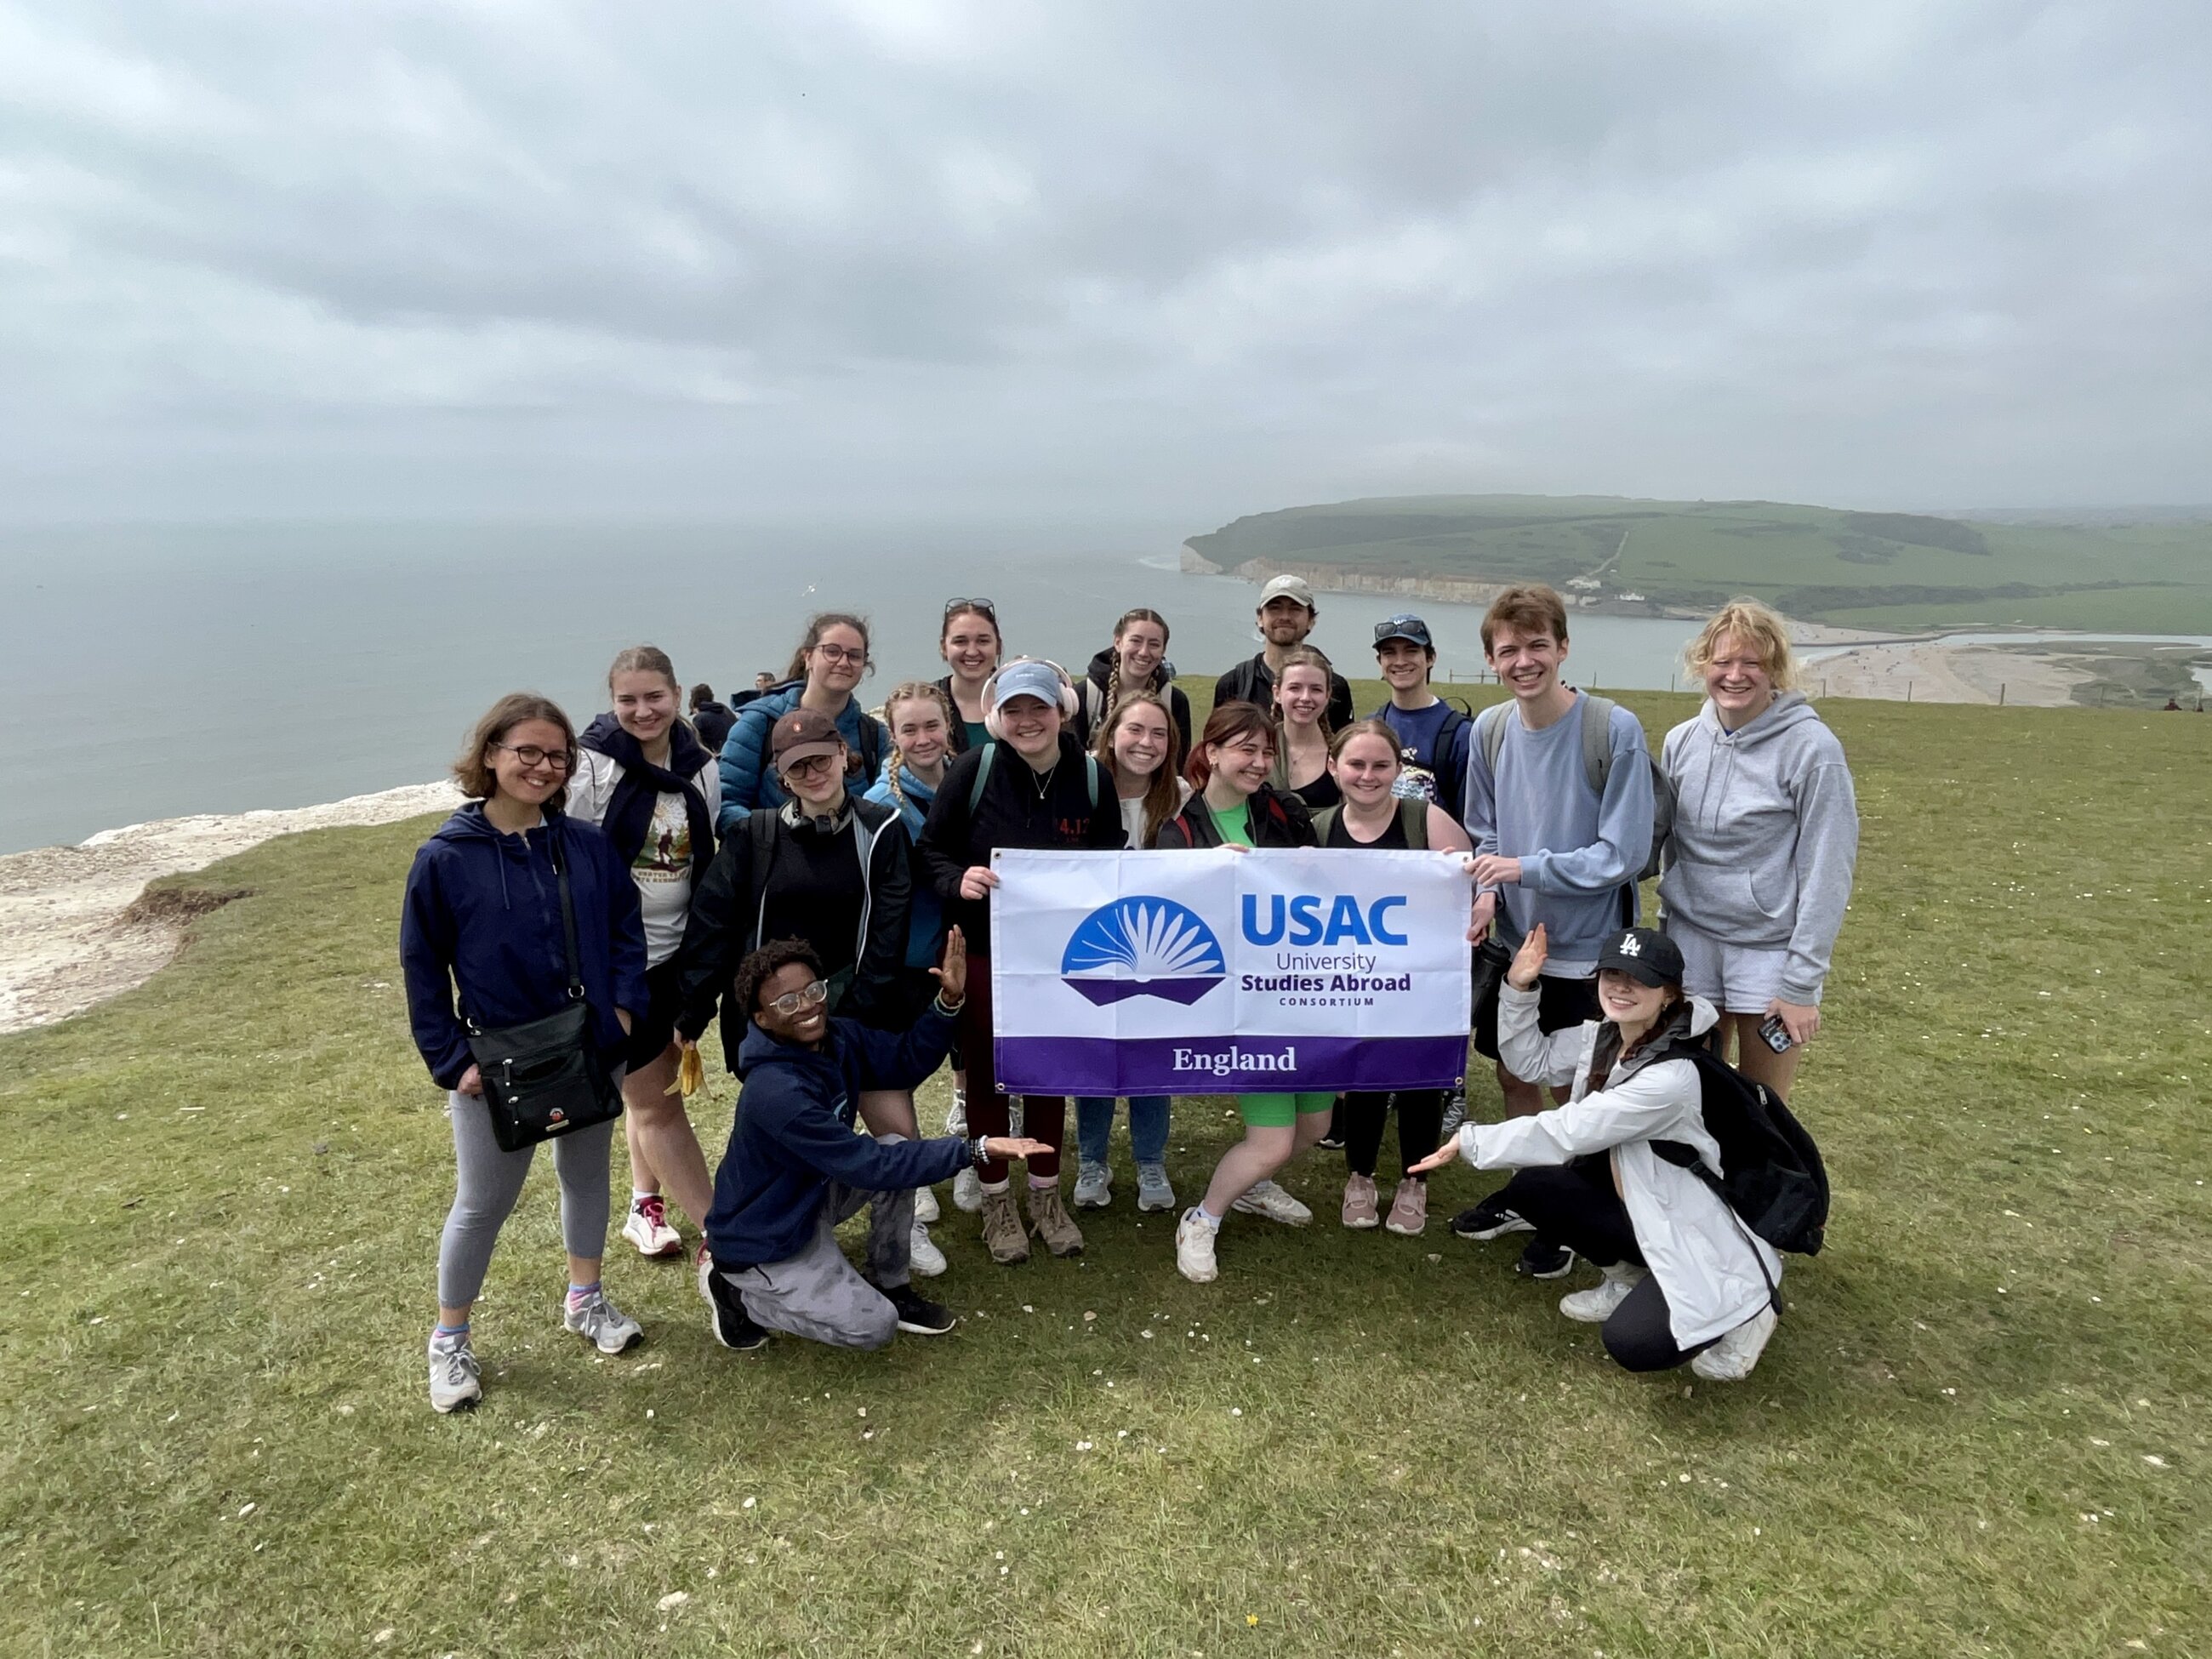 Seven Sisters Hike near end of programme